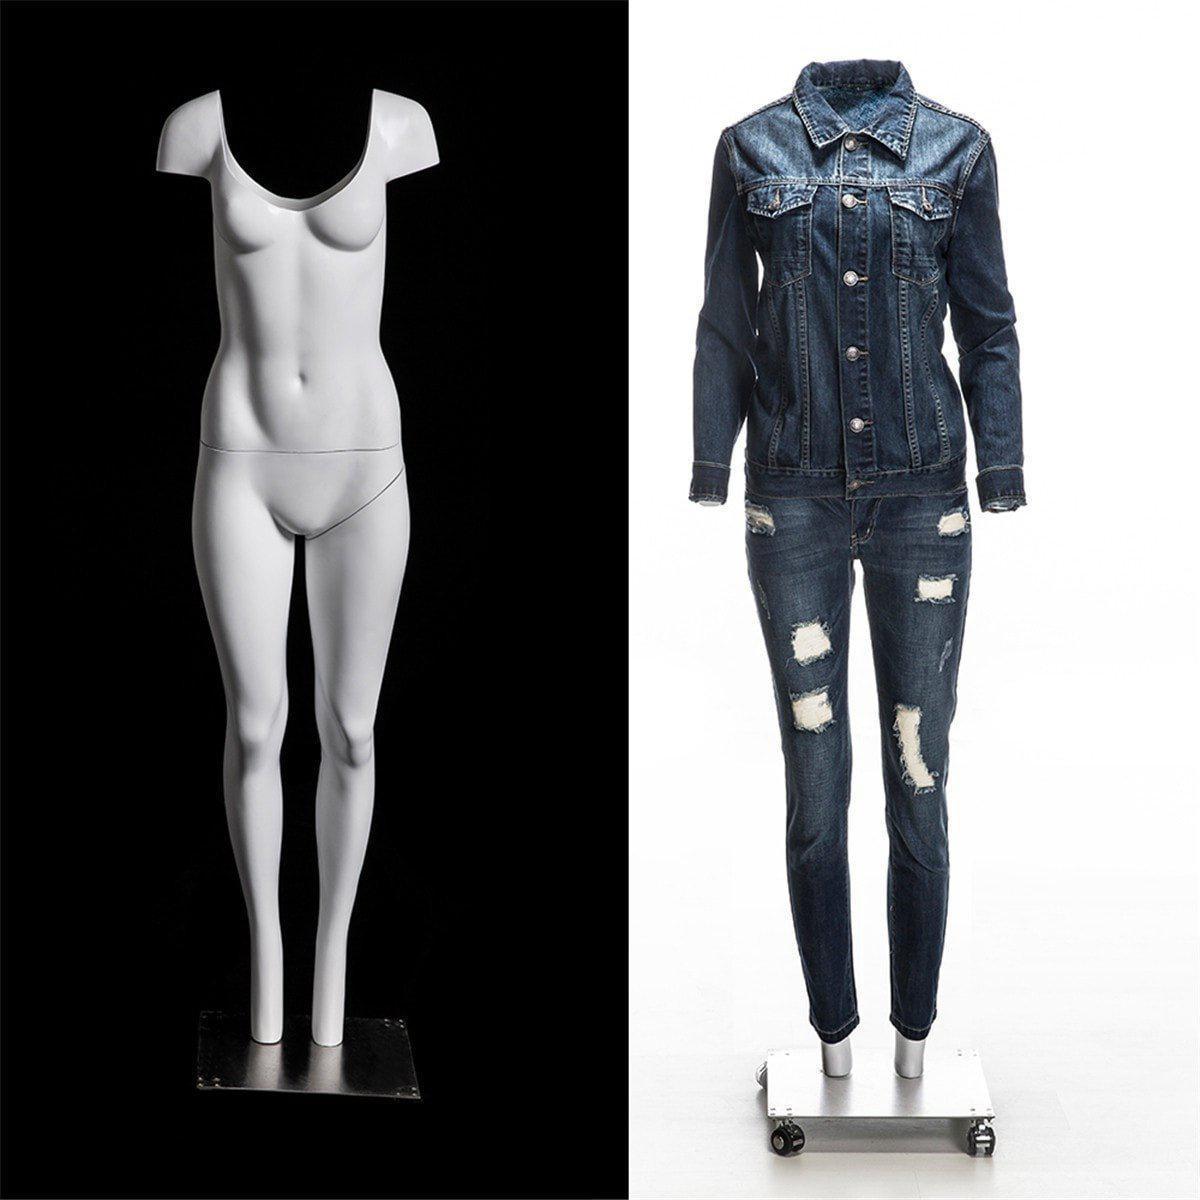 Female Invisible Ghost Mannequin Full Body for Photography (Version 1.0) MM-MZGH2 - Mannequin Mall